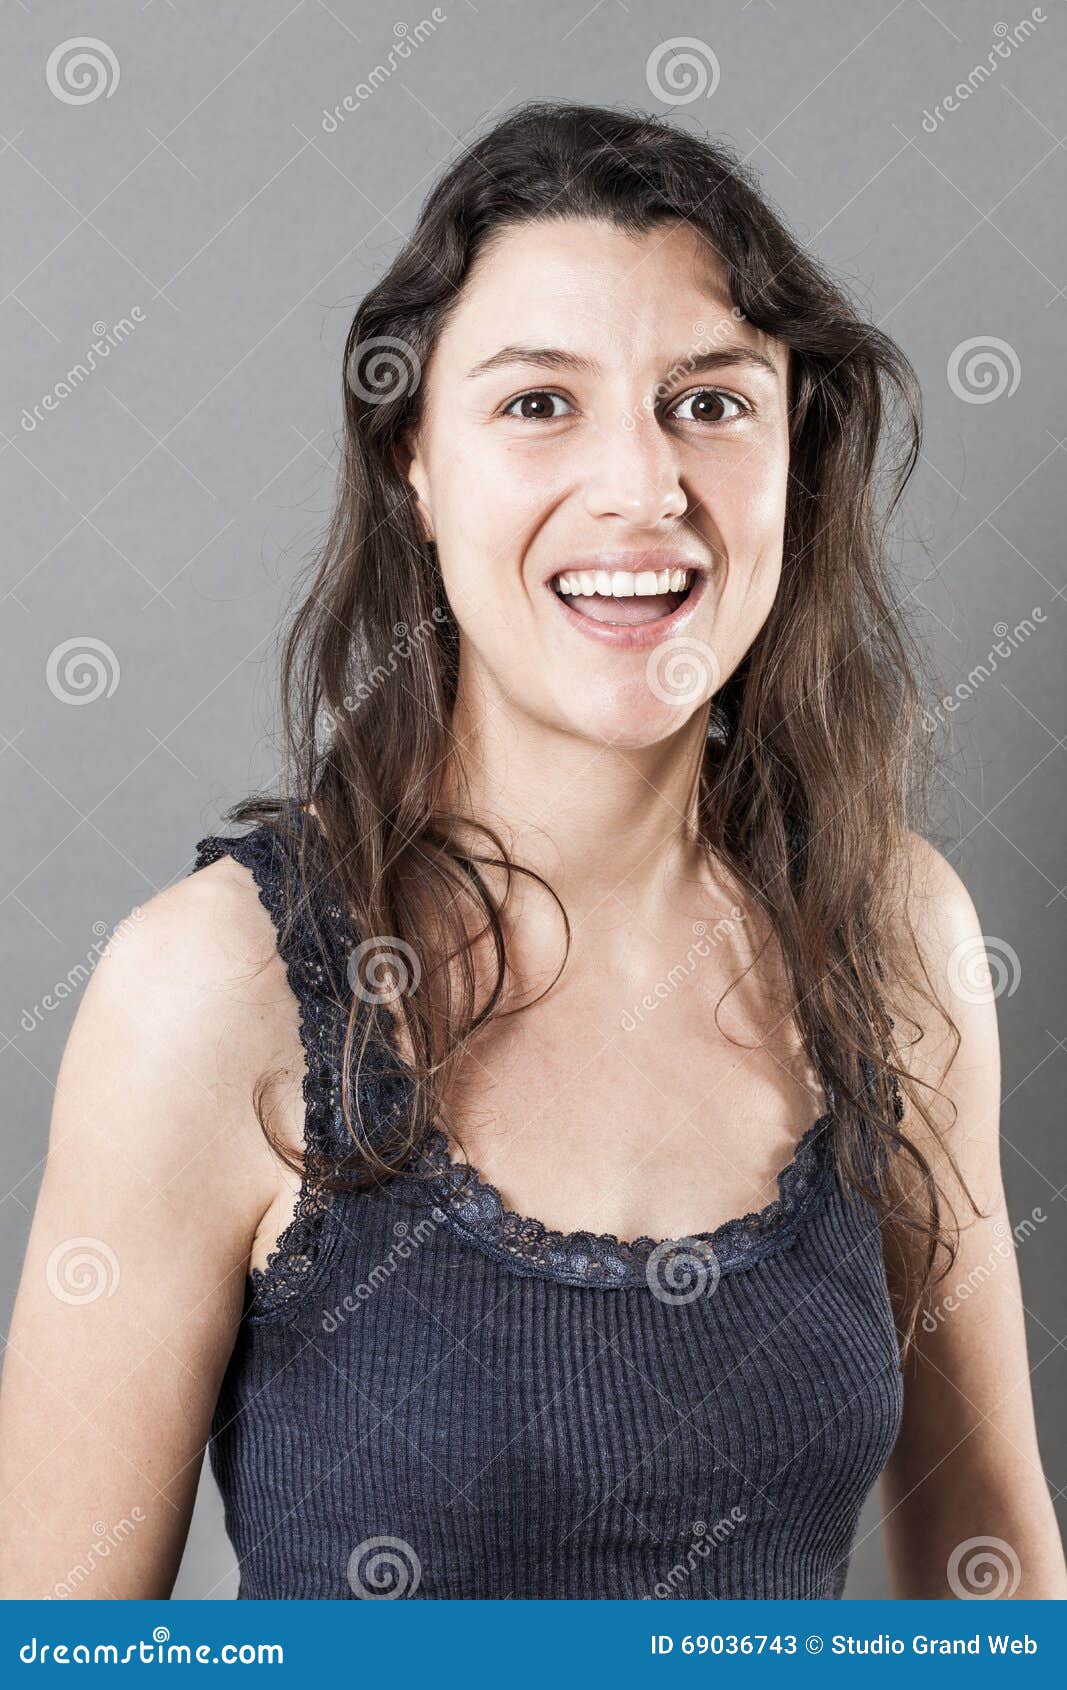 thrilled woman with smiling expressing happiness and wellbeing